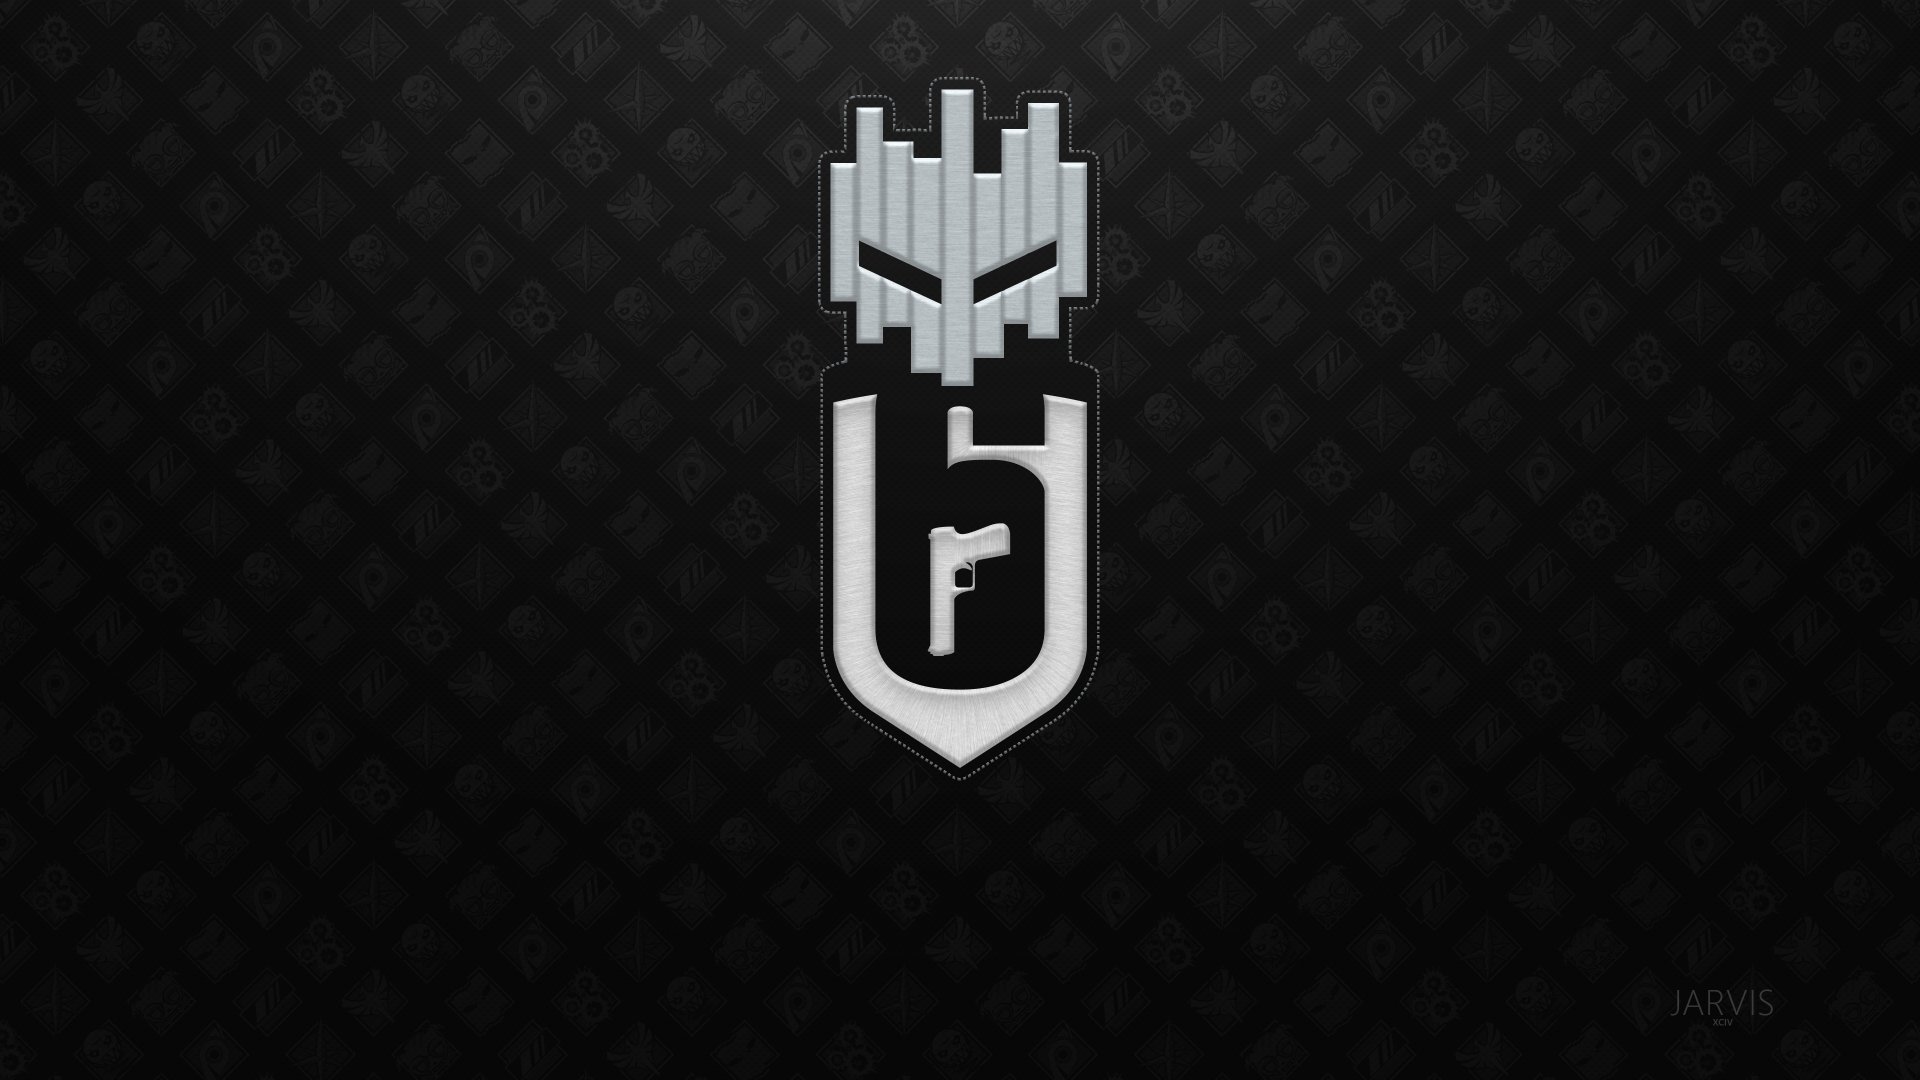 android rainbow six siege backgrounds